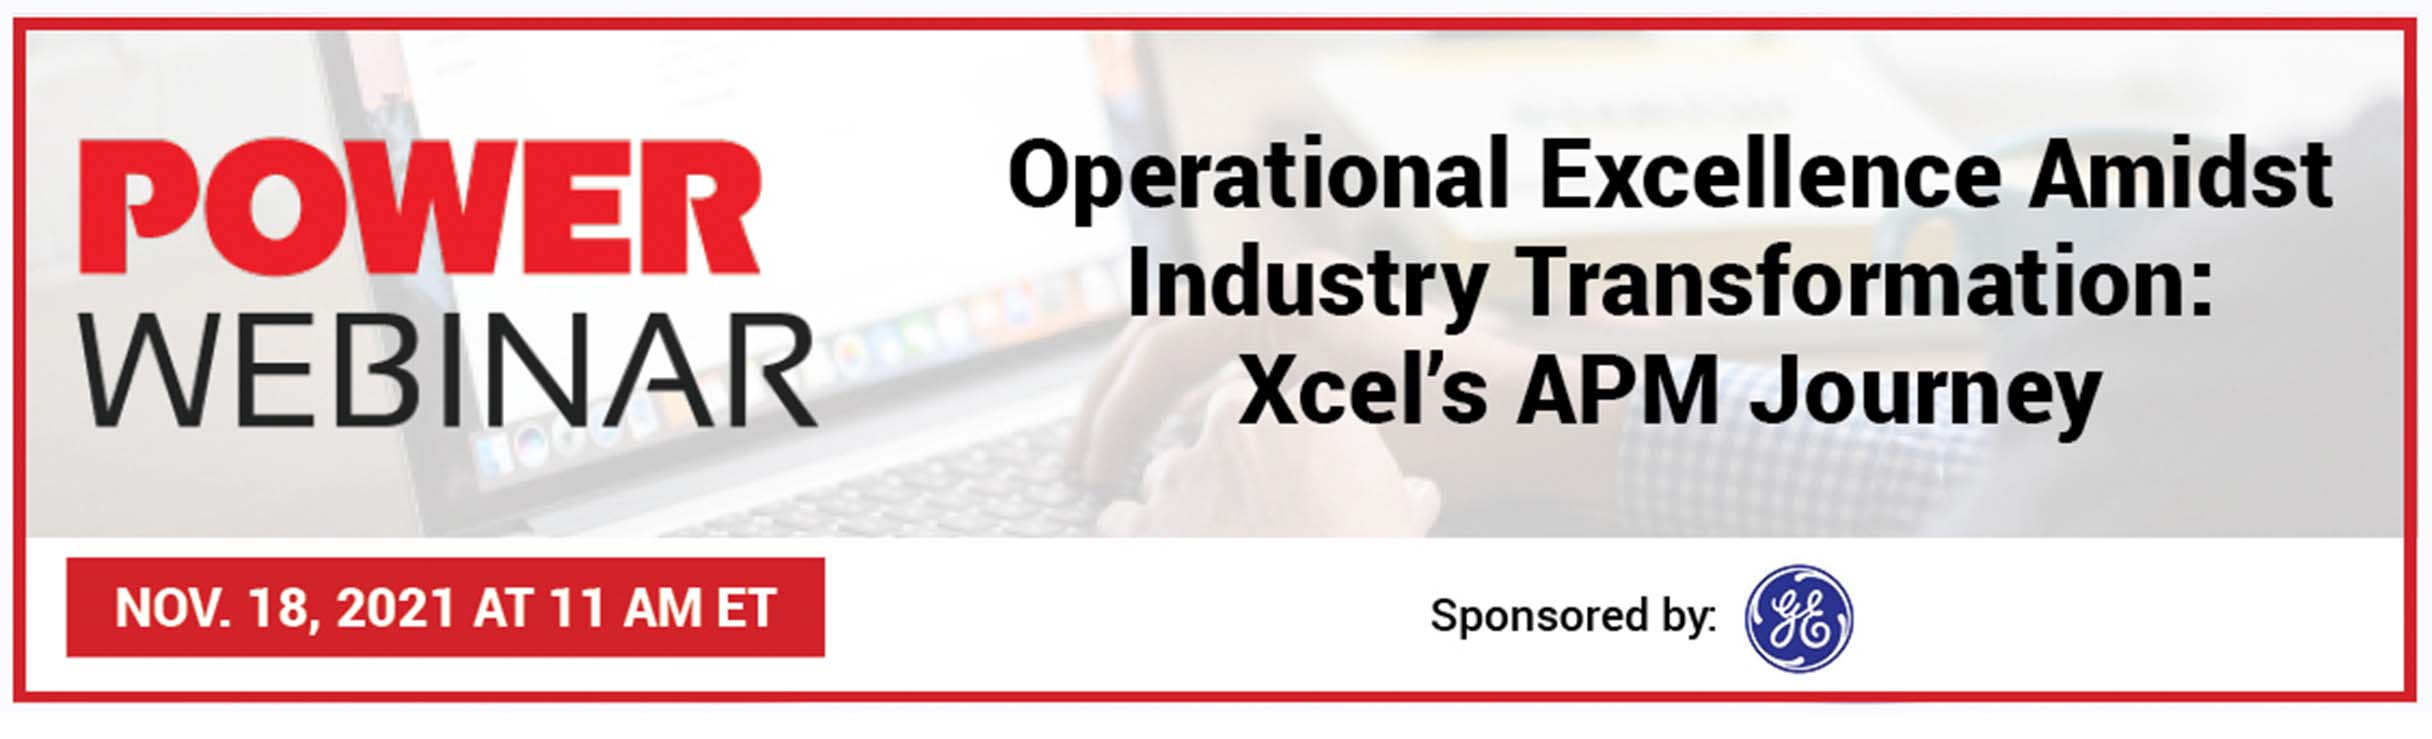 Operational Excellence Amidst Industry Transformation: Xcel's APM Journey